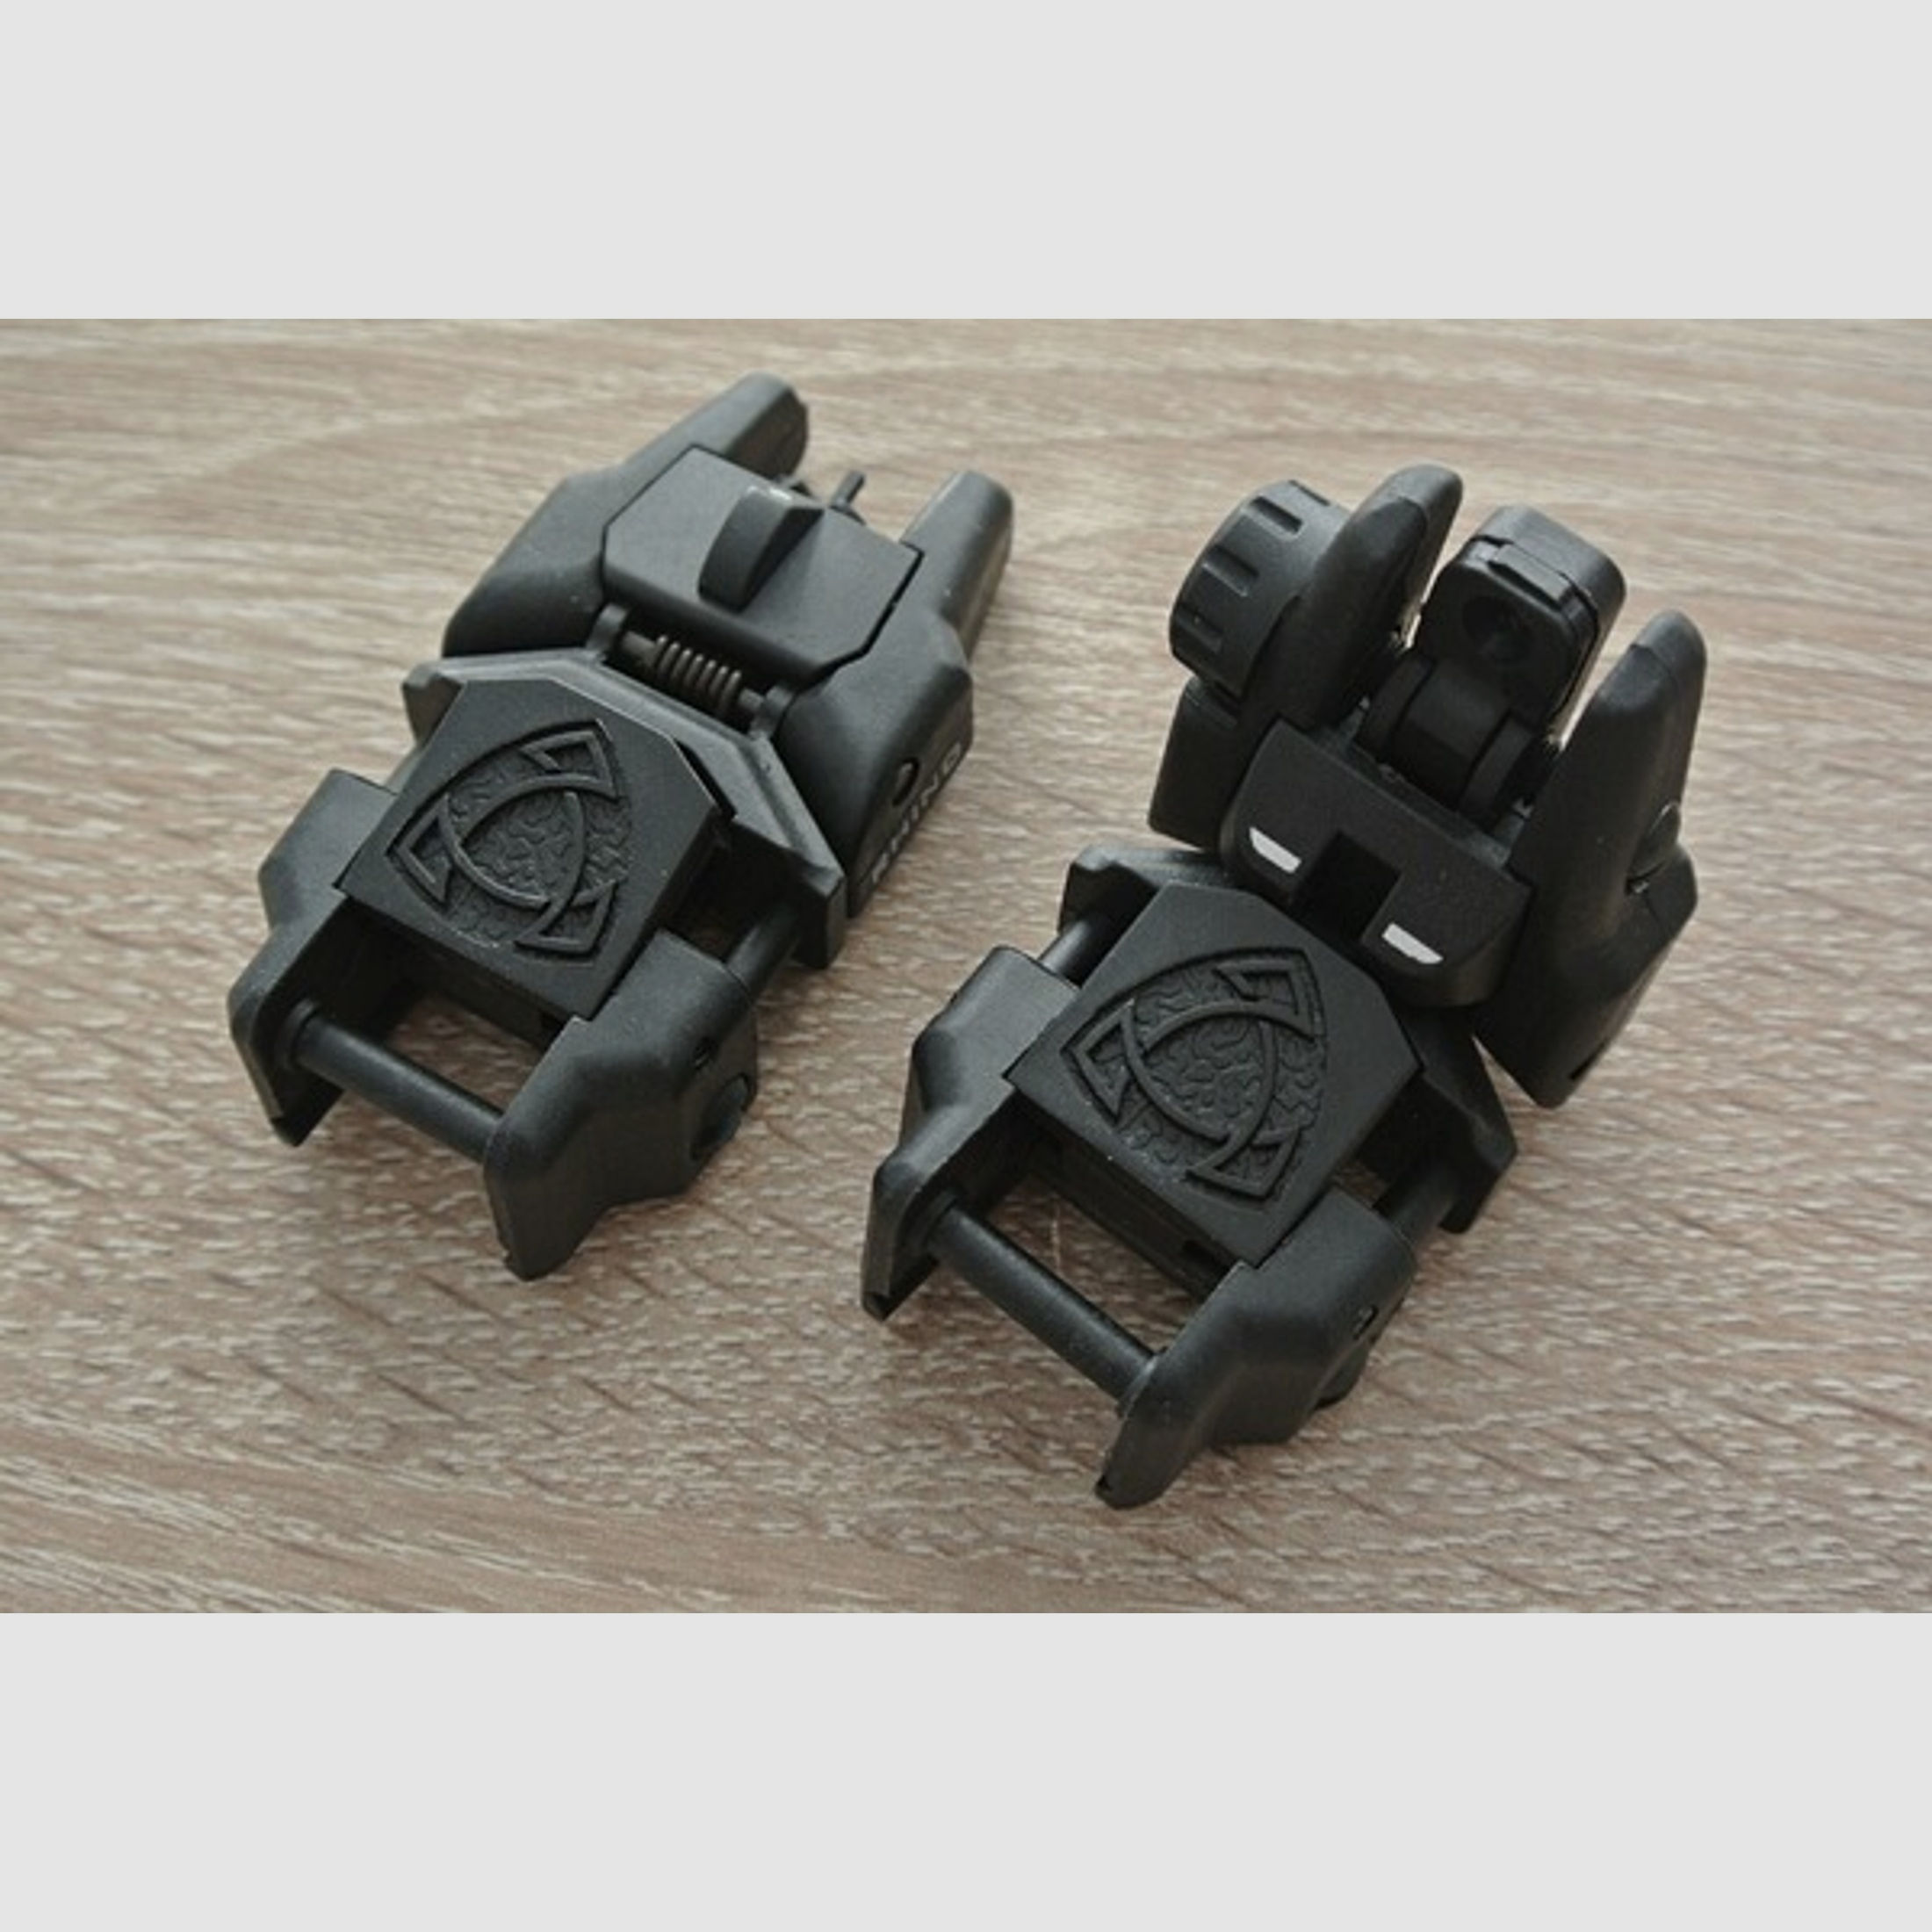 Rhino Rear Sight APS Front Sight Kimme und Korn Kunststoff  Airsoft